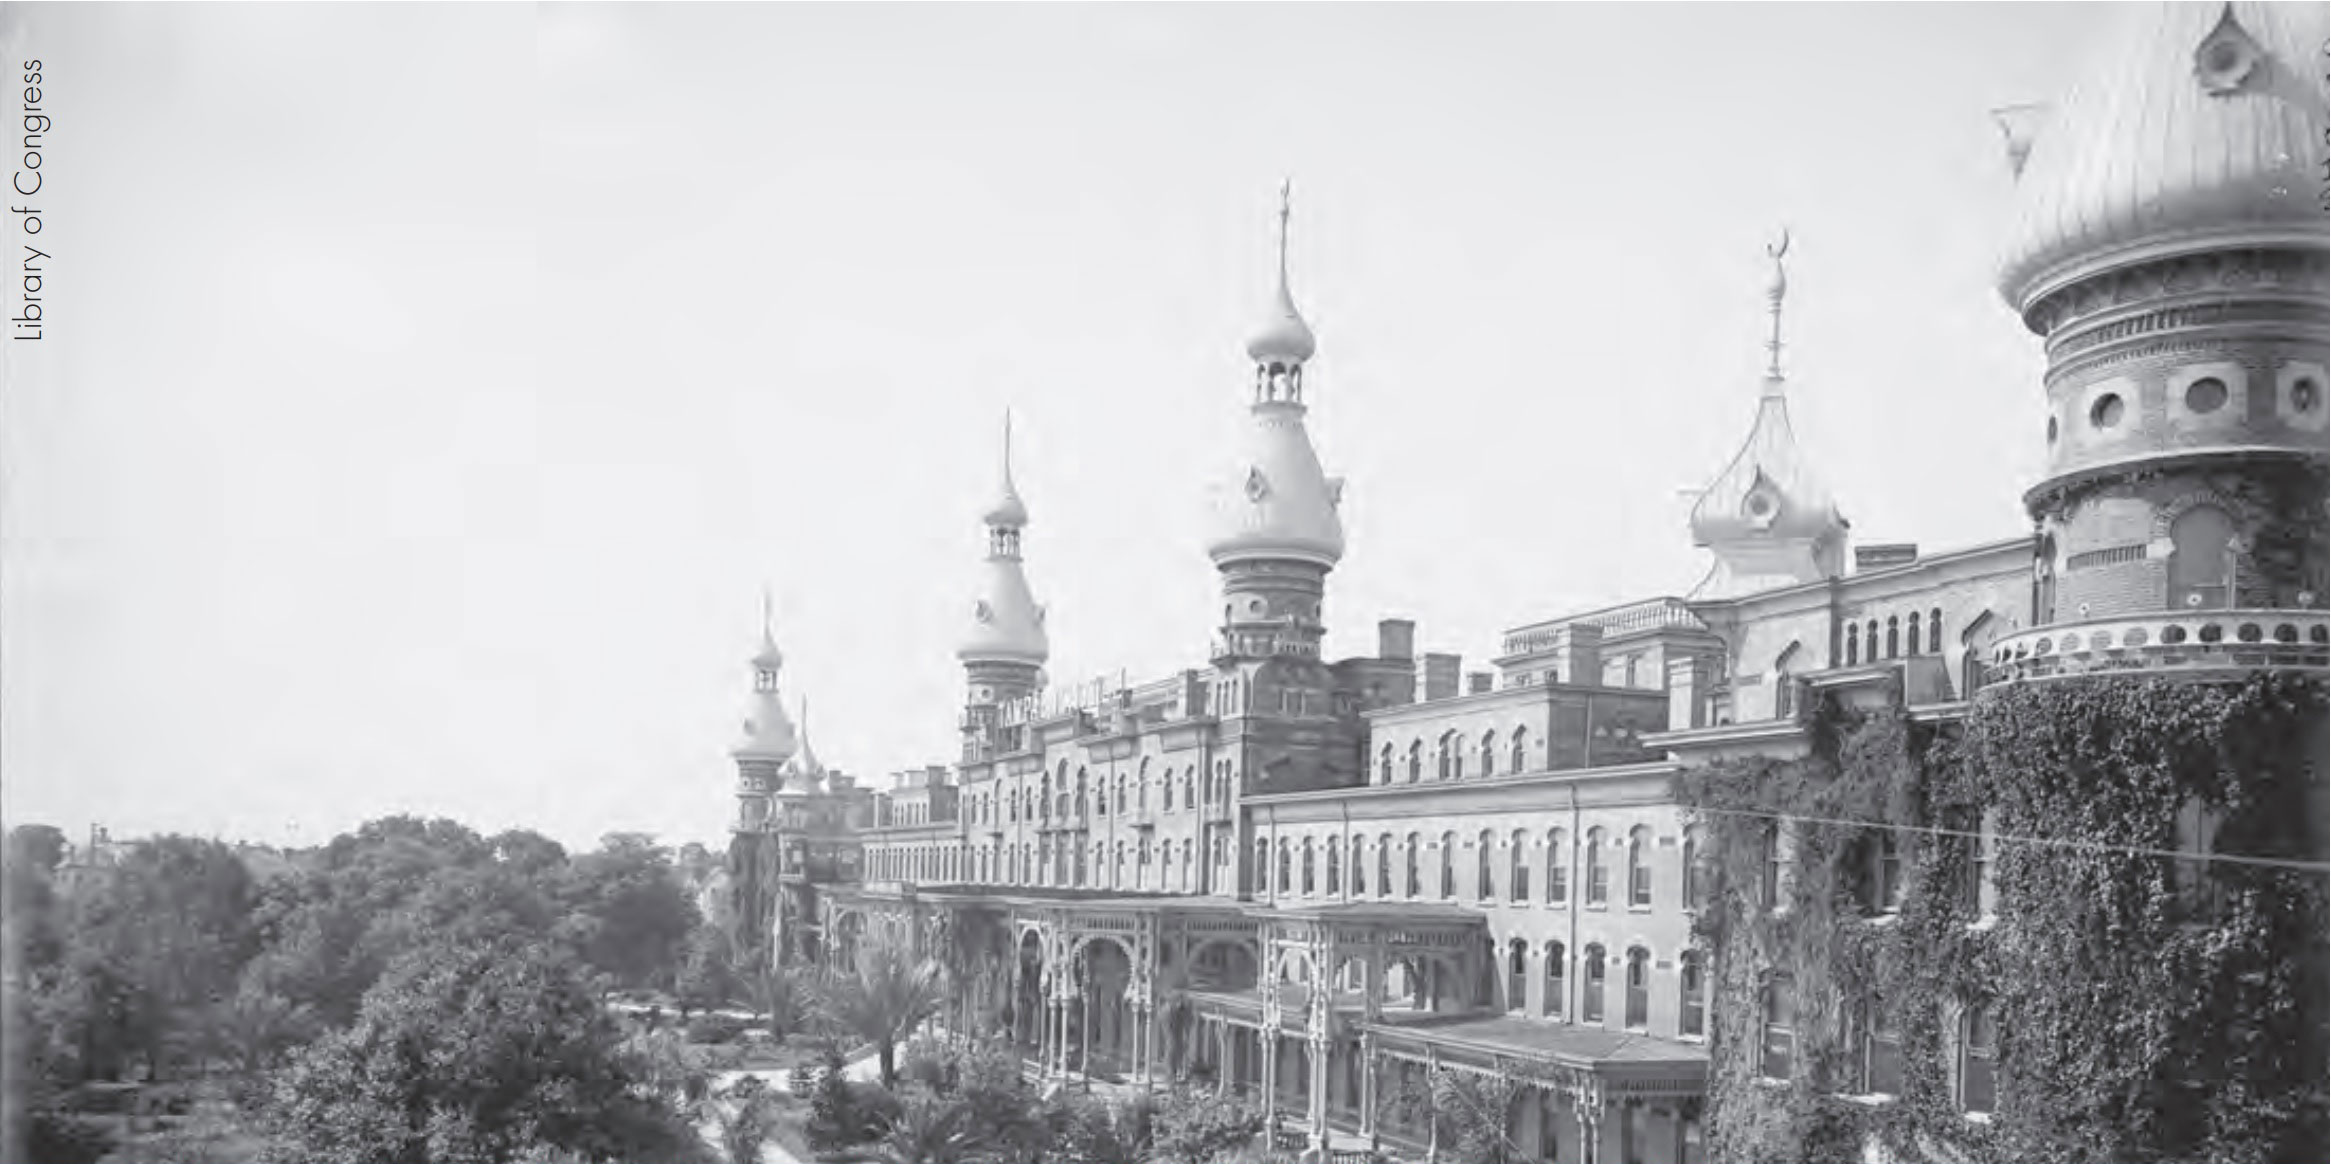 The Tampa Bay Hotel, c. 1898